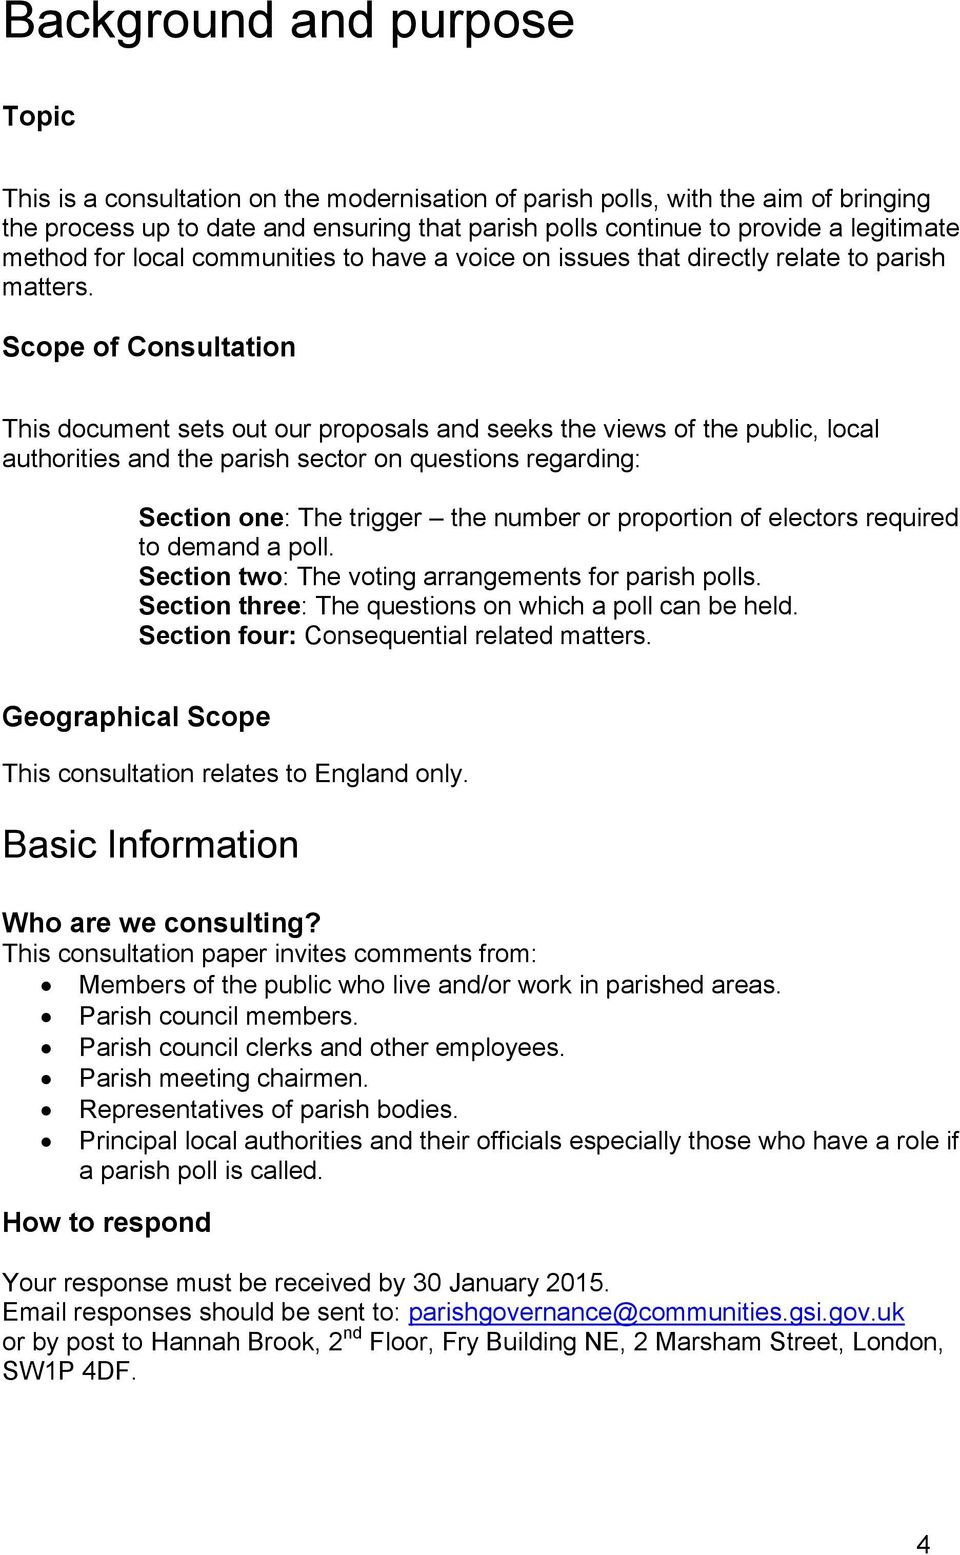 Scope of Consultation This document sets out our proposals and seeks the views of the public, local authorities and the parish sector on questions regarding: Section one: The trigger the number or